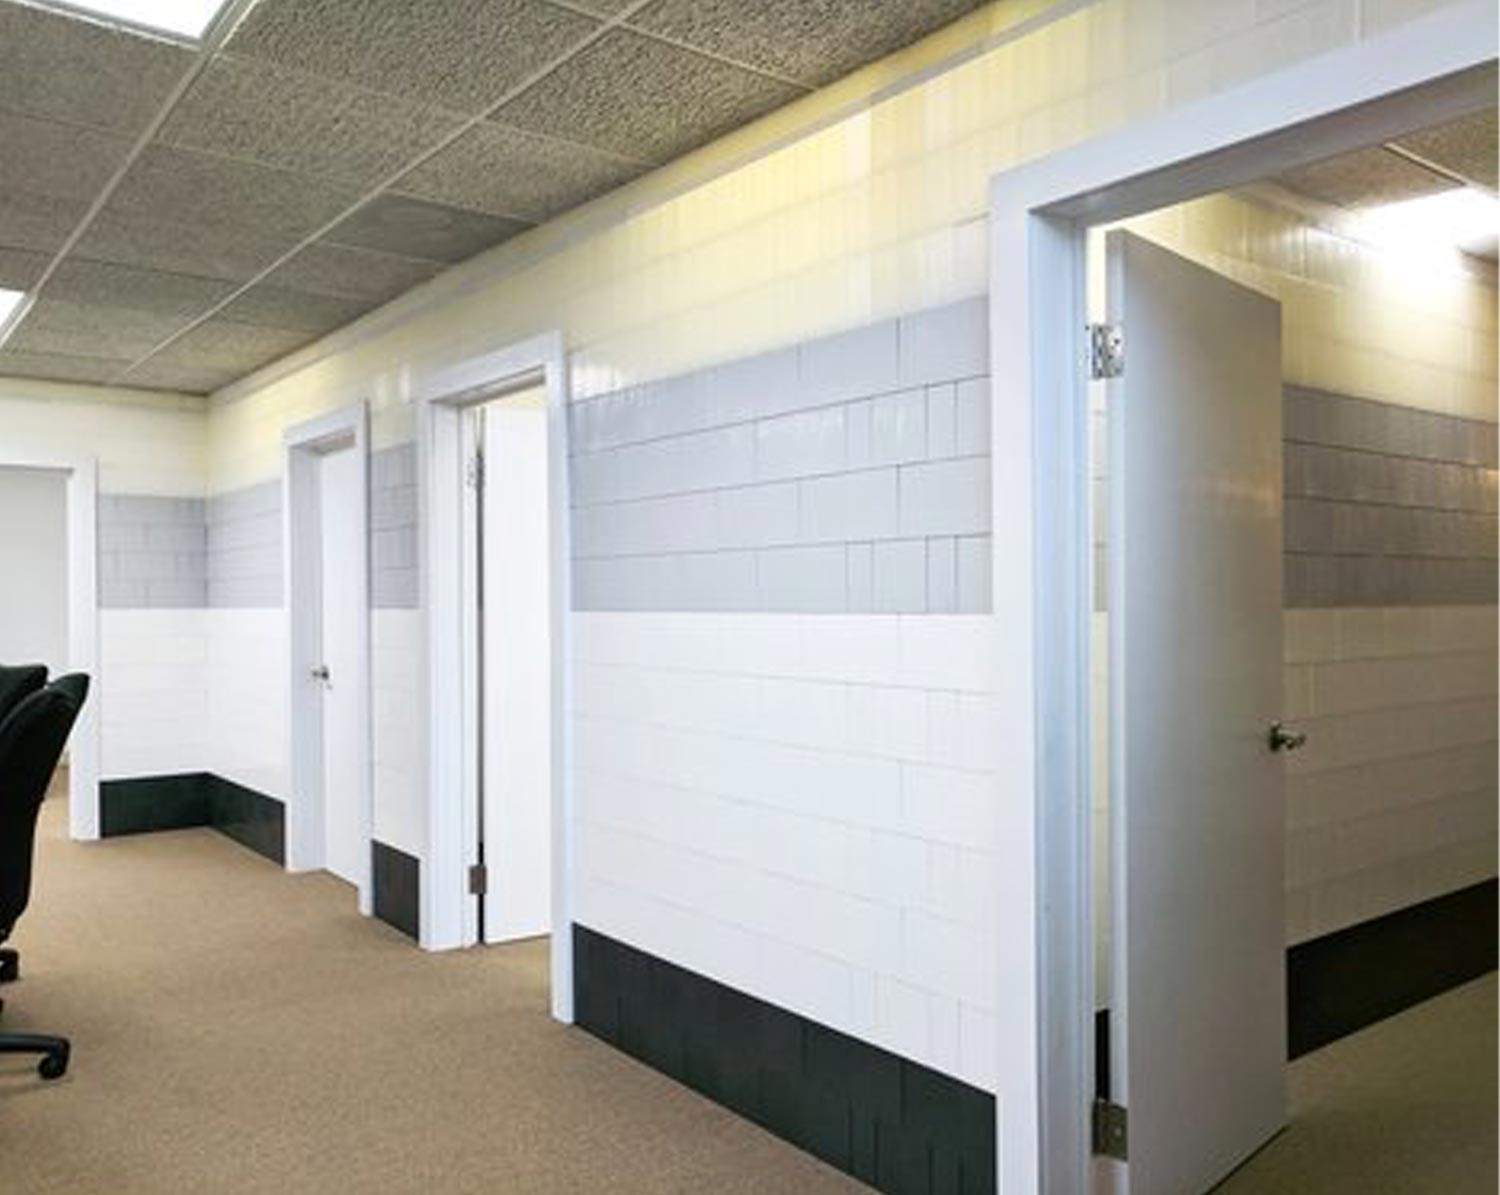 The EverBlock T-Shaped Wall Kit comes equipped with 2 accordion doors to integrate into your build. 